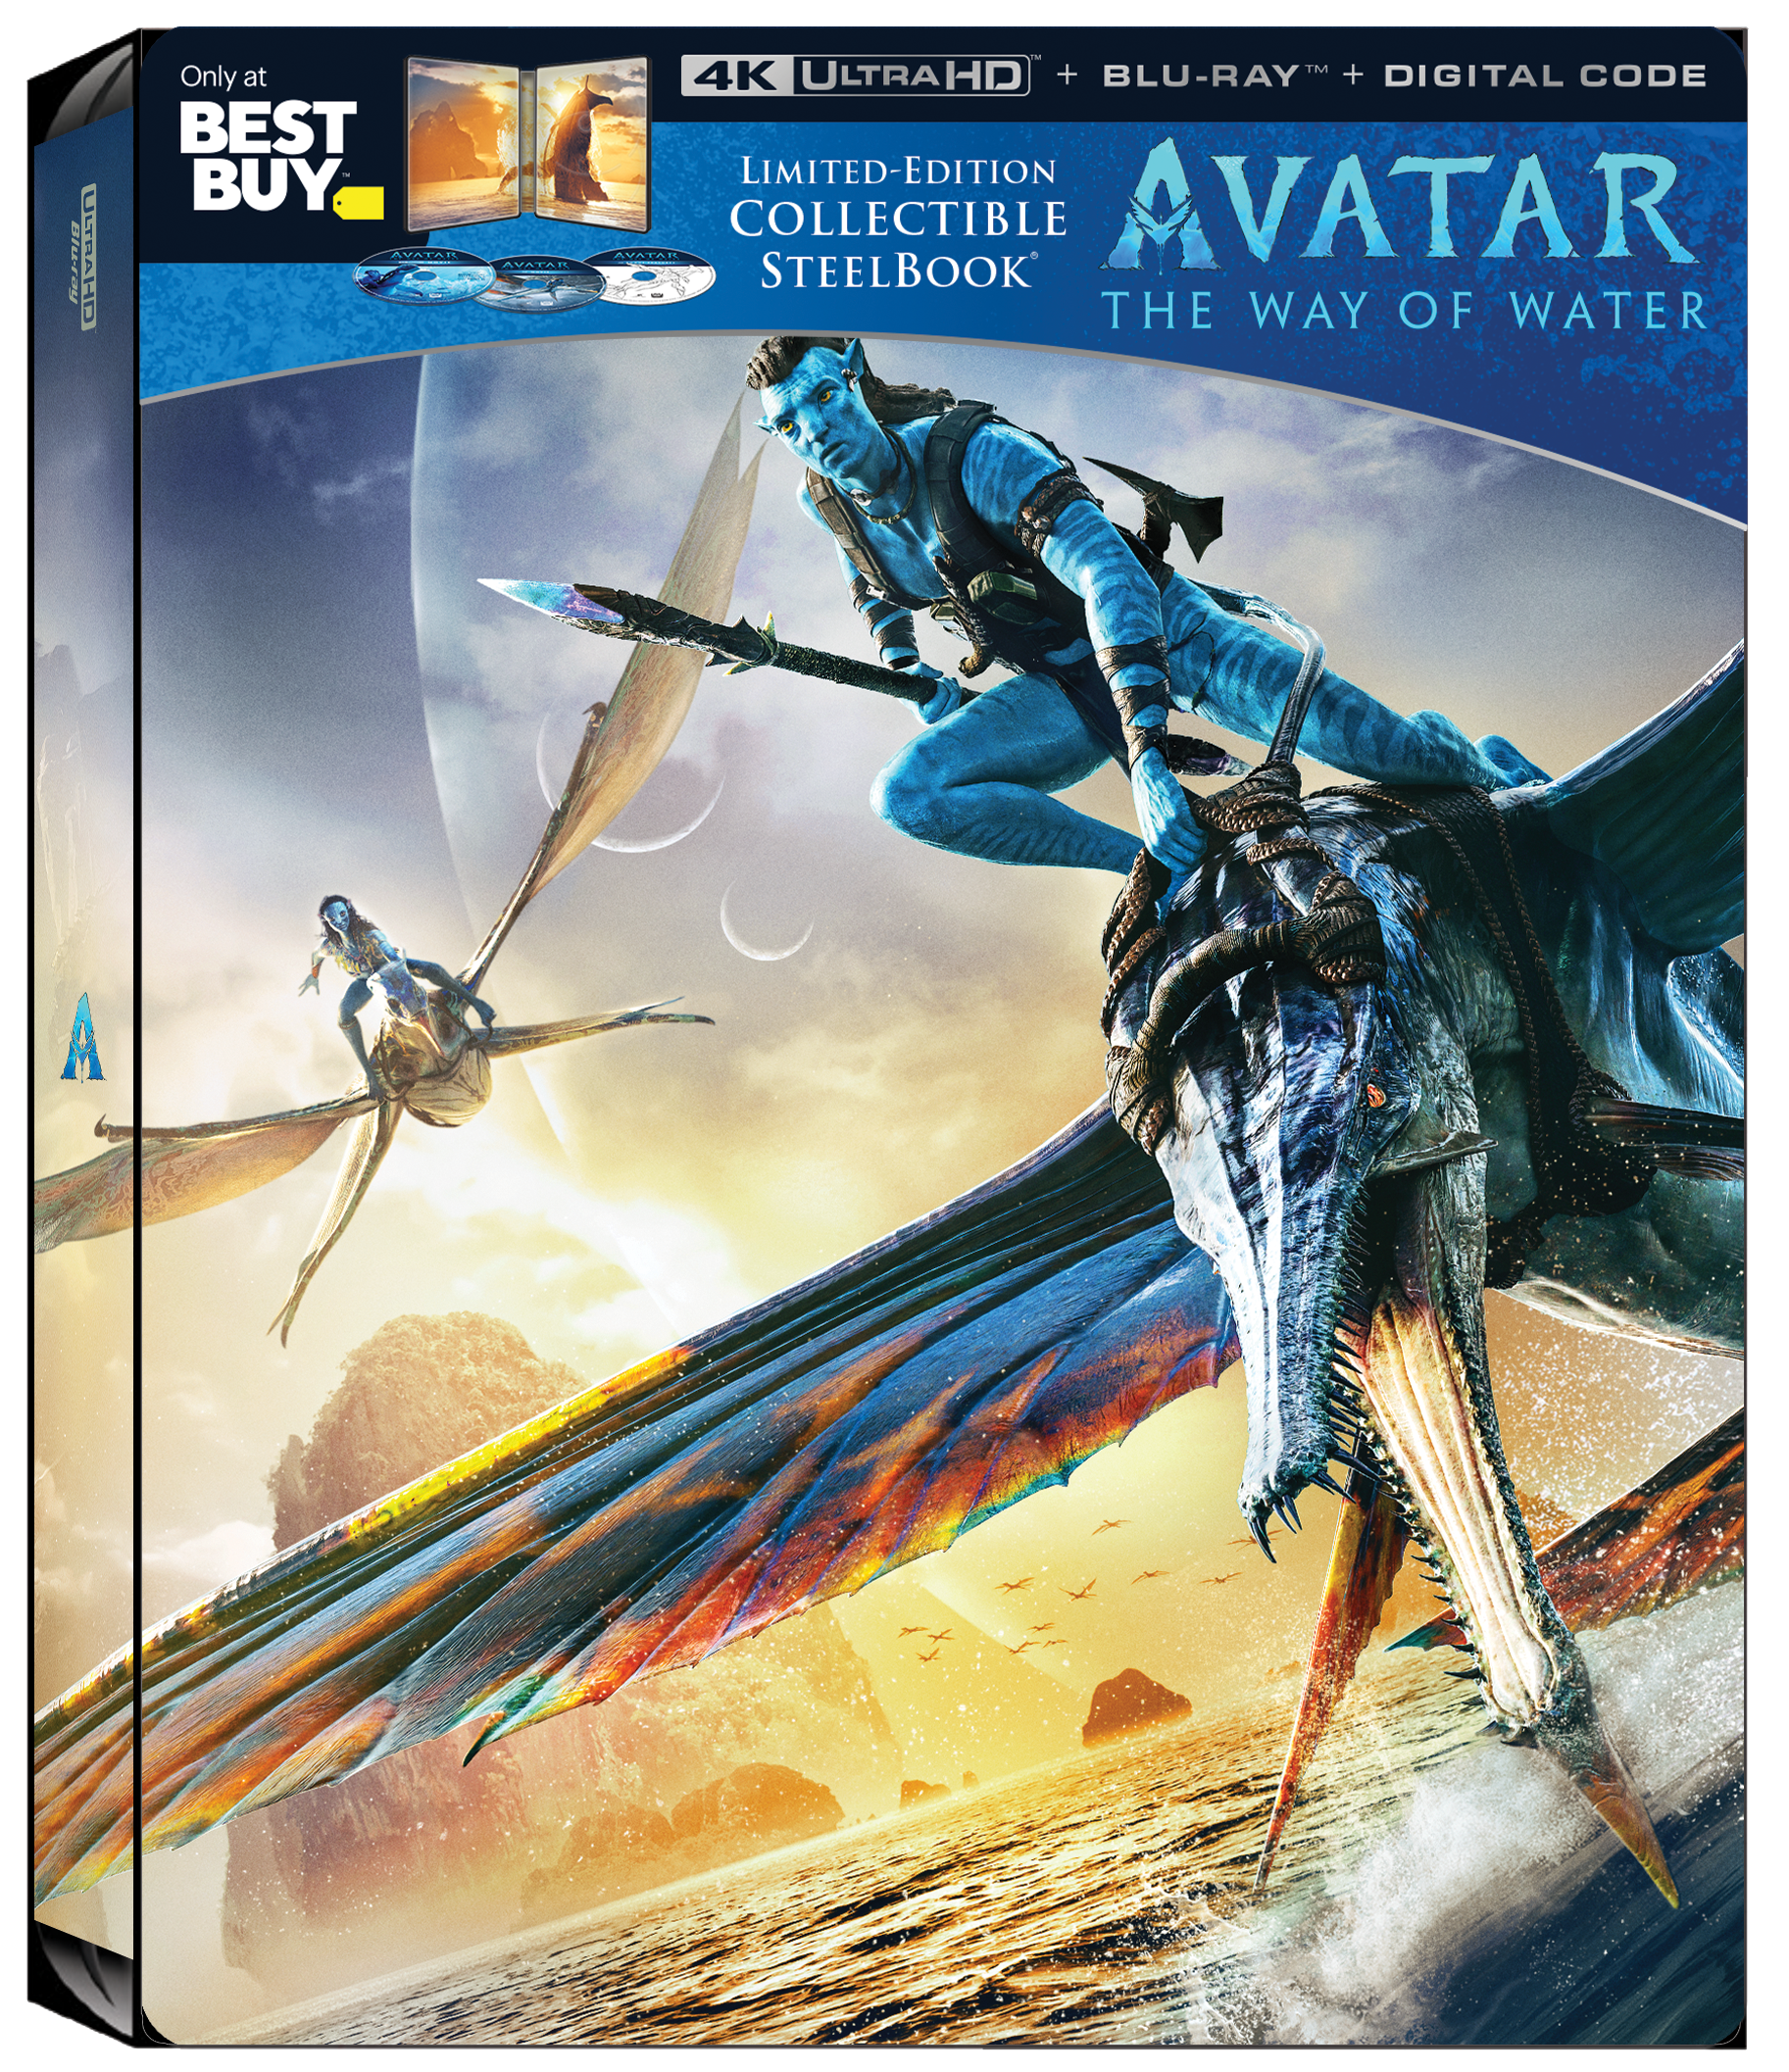 Dive Deep into the World of “Avatar: The Way of Water” - Bring